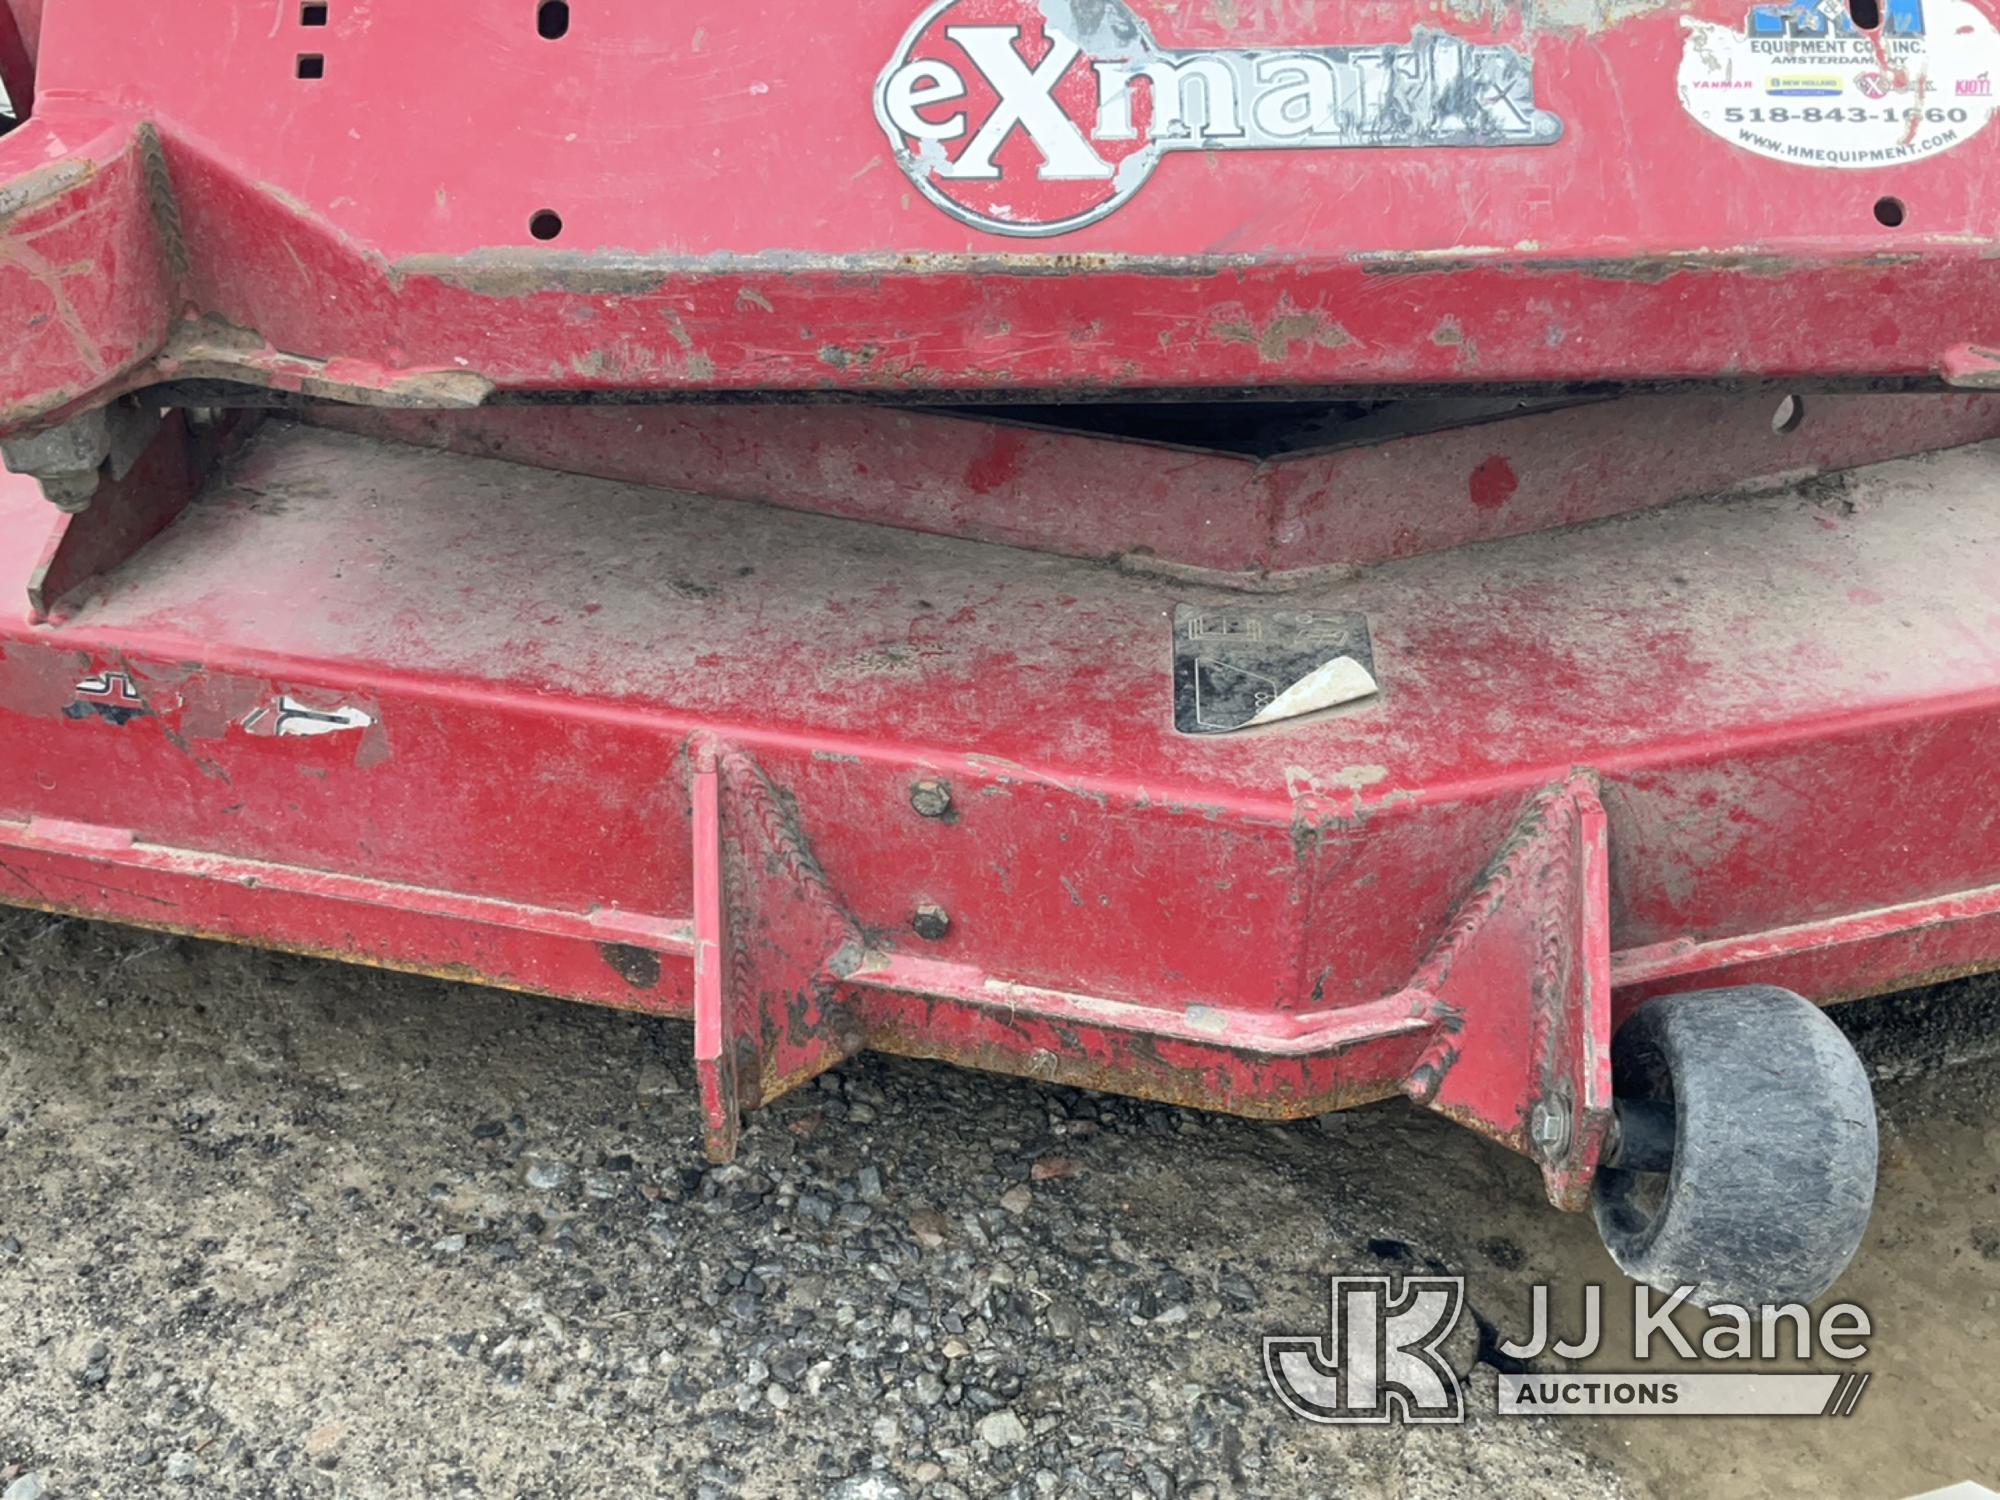 (Rome, NY) Exmark Lazer Z 72 Zero Turn Riding Mower Missing Parts, Not Running, Condition Unknown